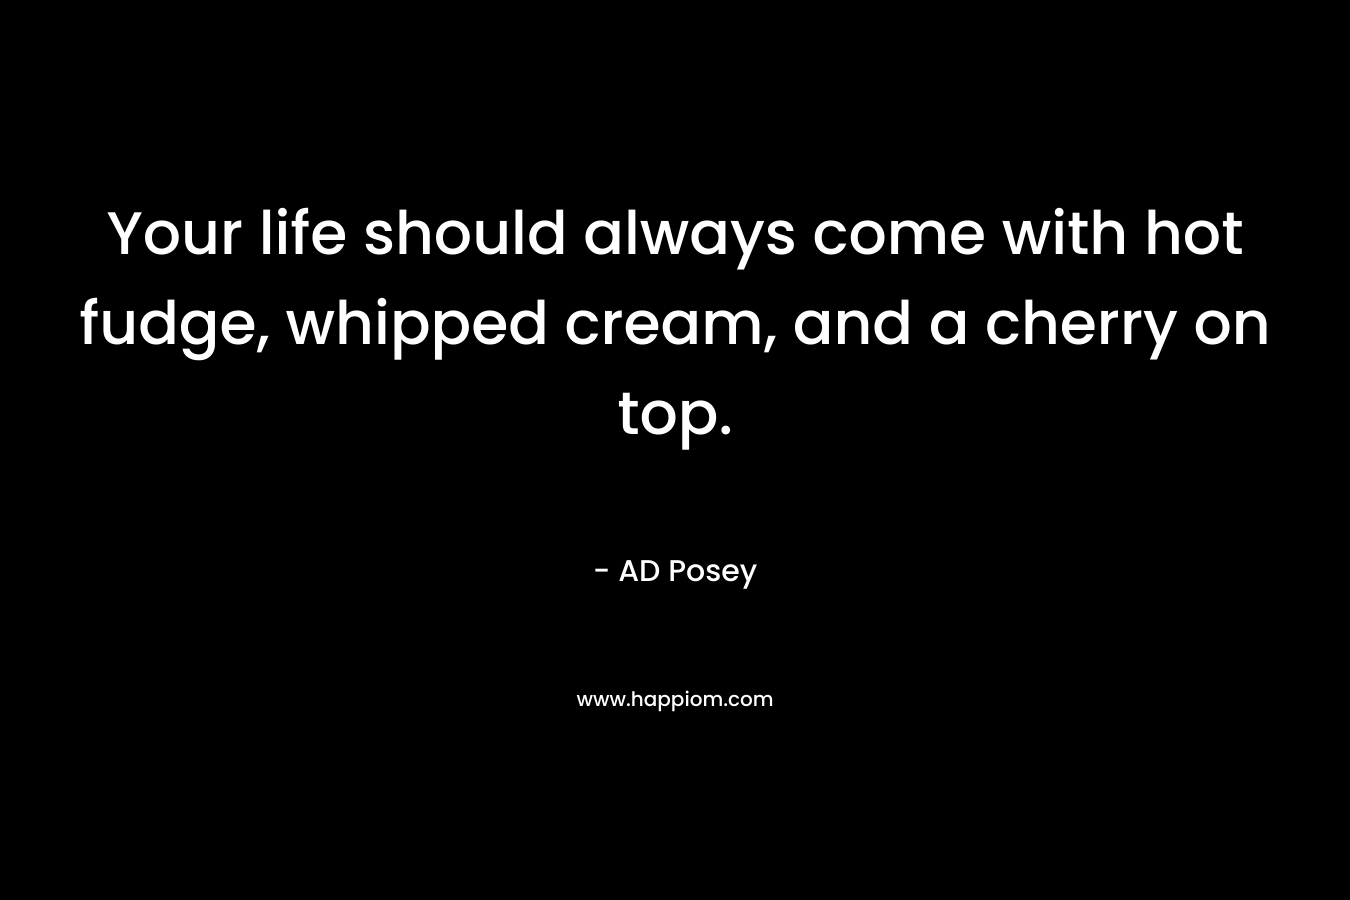 Your life should always come with hot fudge, whipped cream, and a cherry on top. – AD Posey